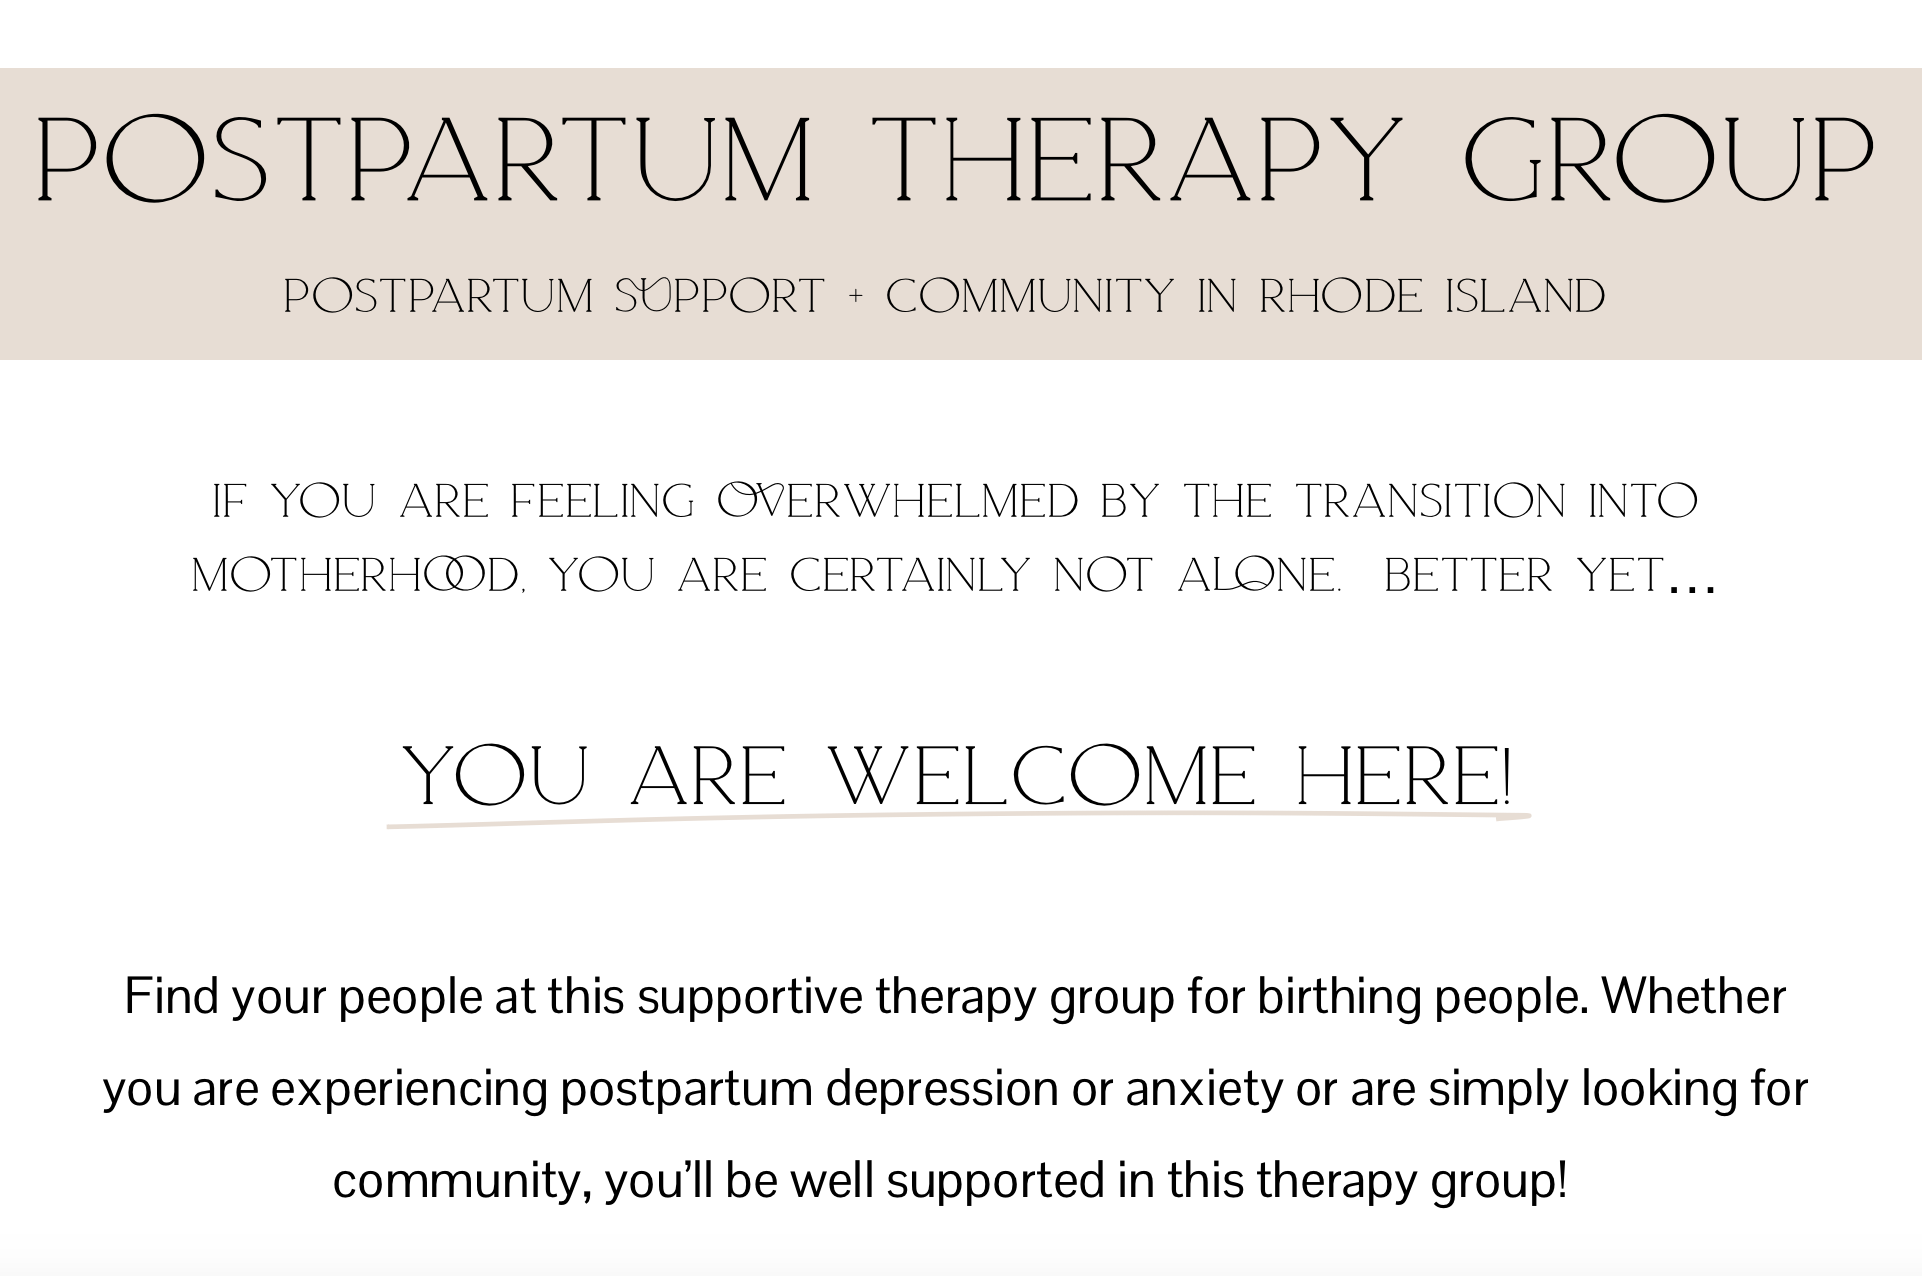 Postpartum Therapy Group Rhode Island 